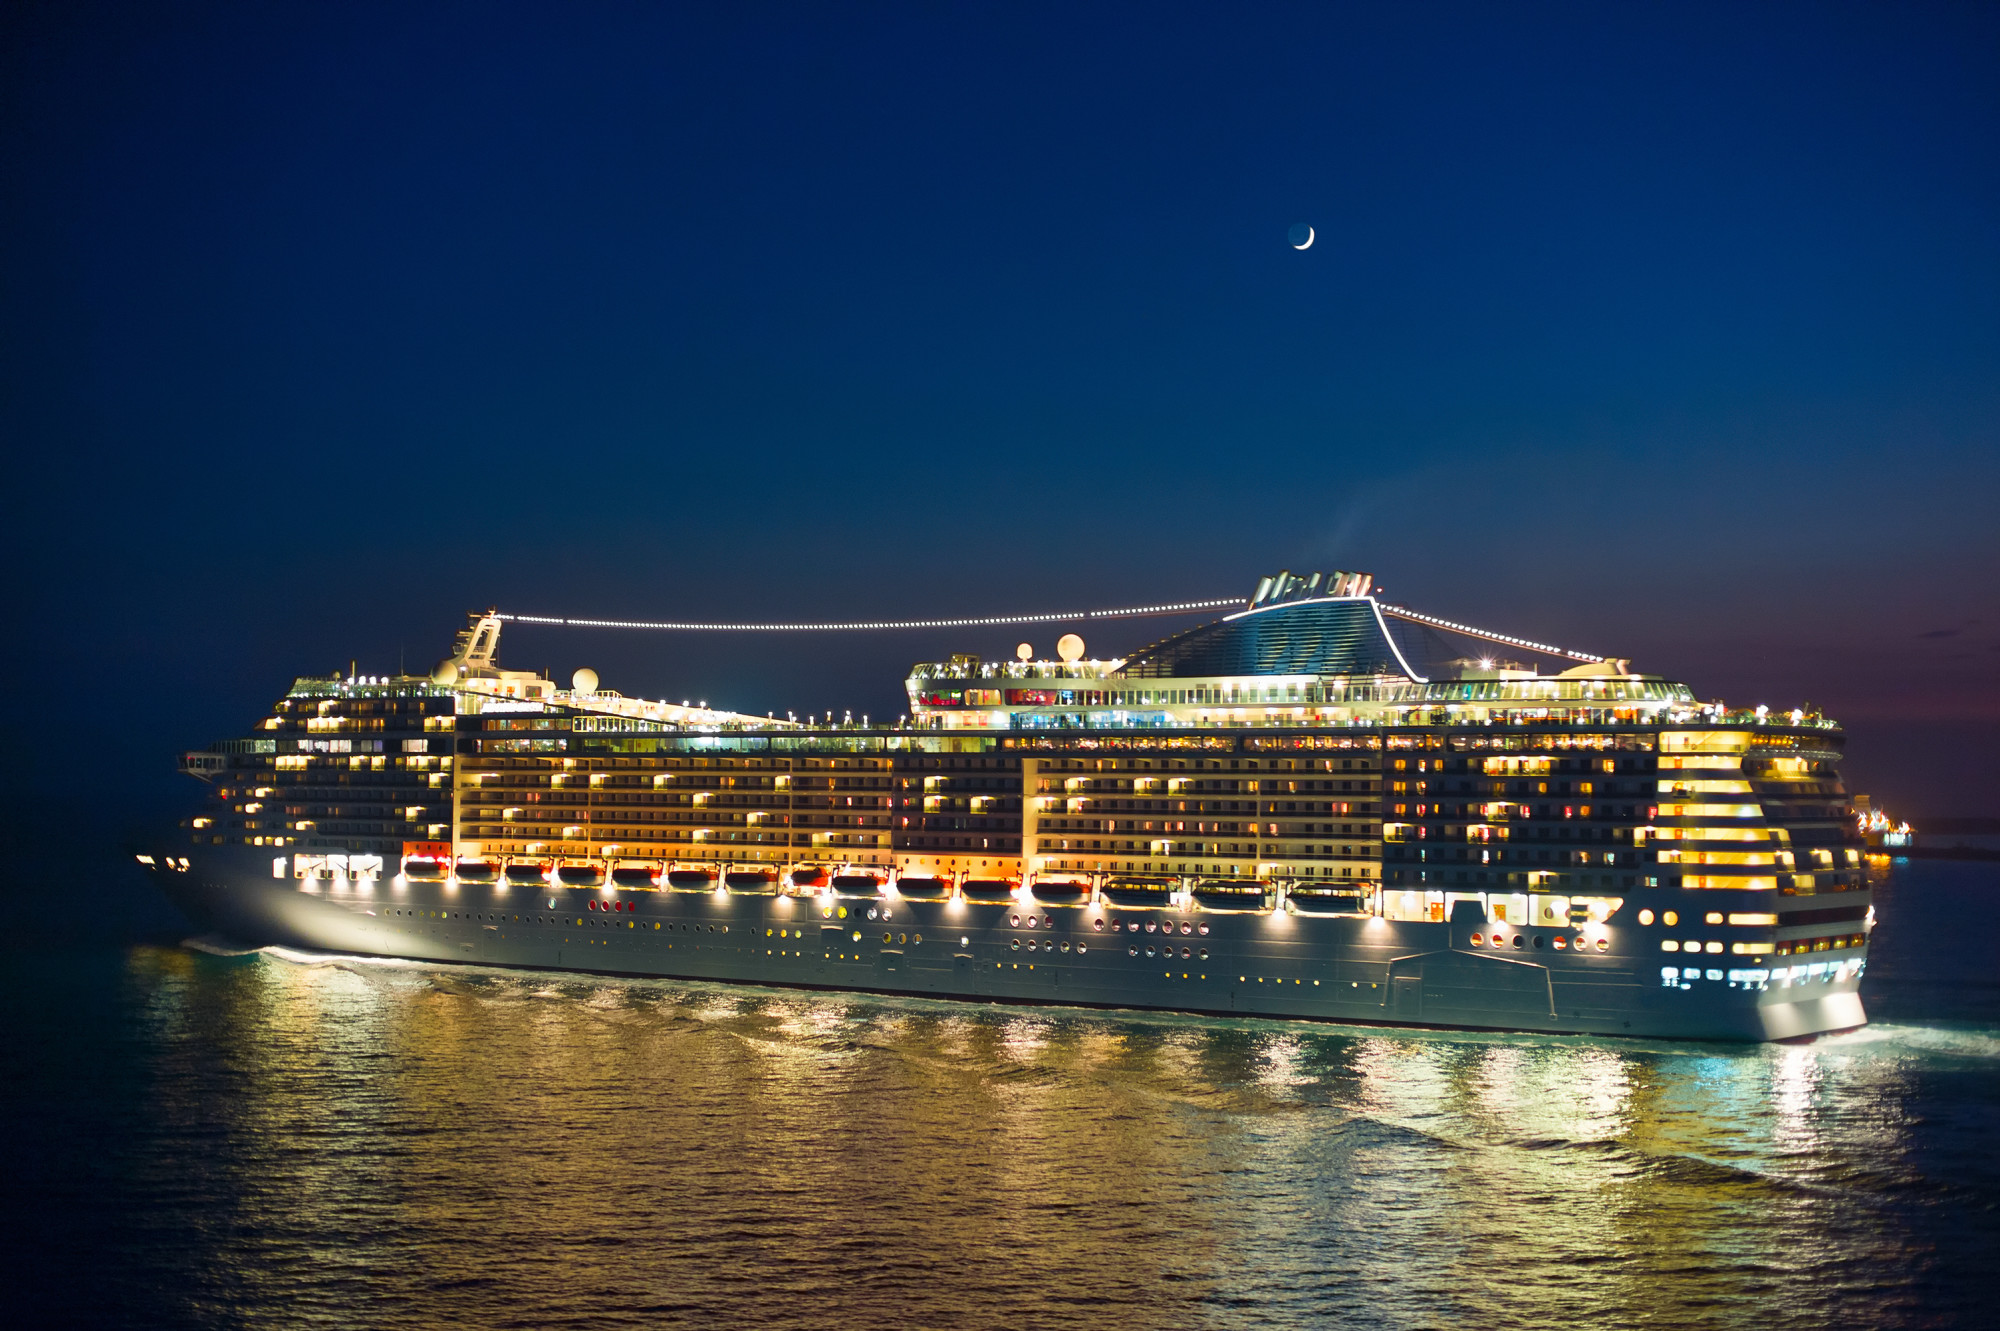 Well-lit Cruise Ship at Night